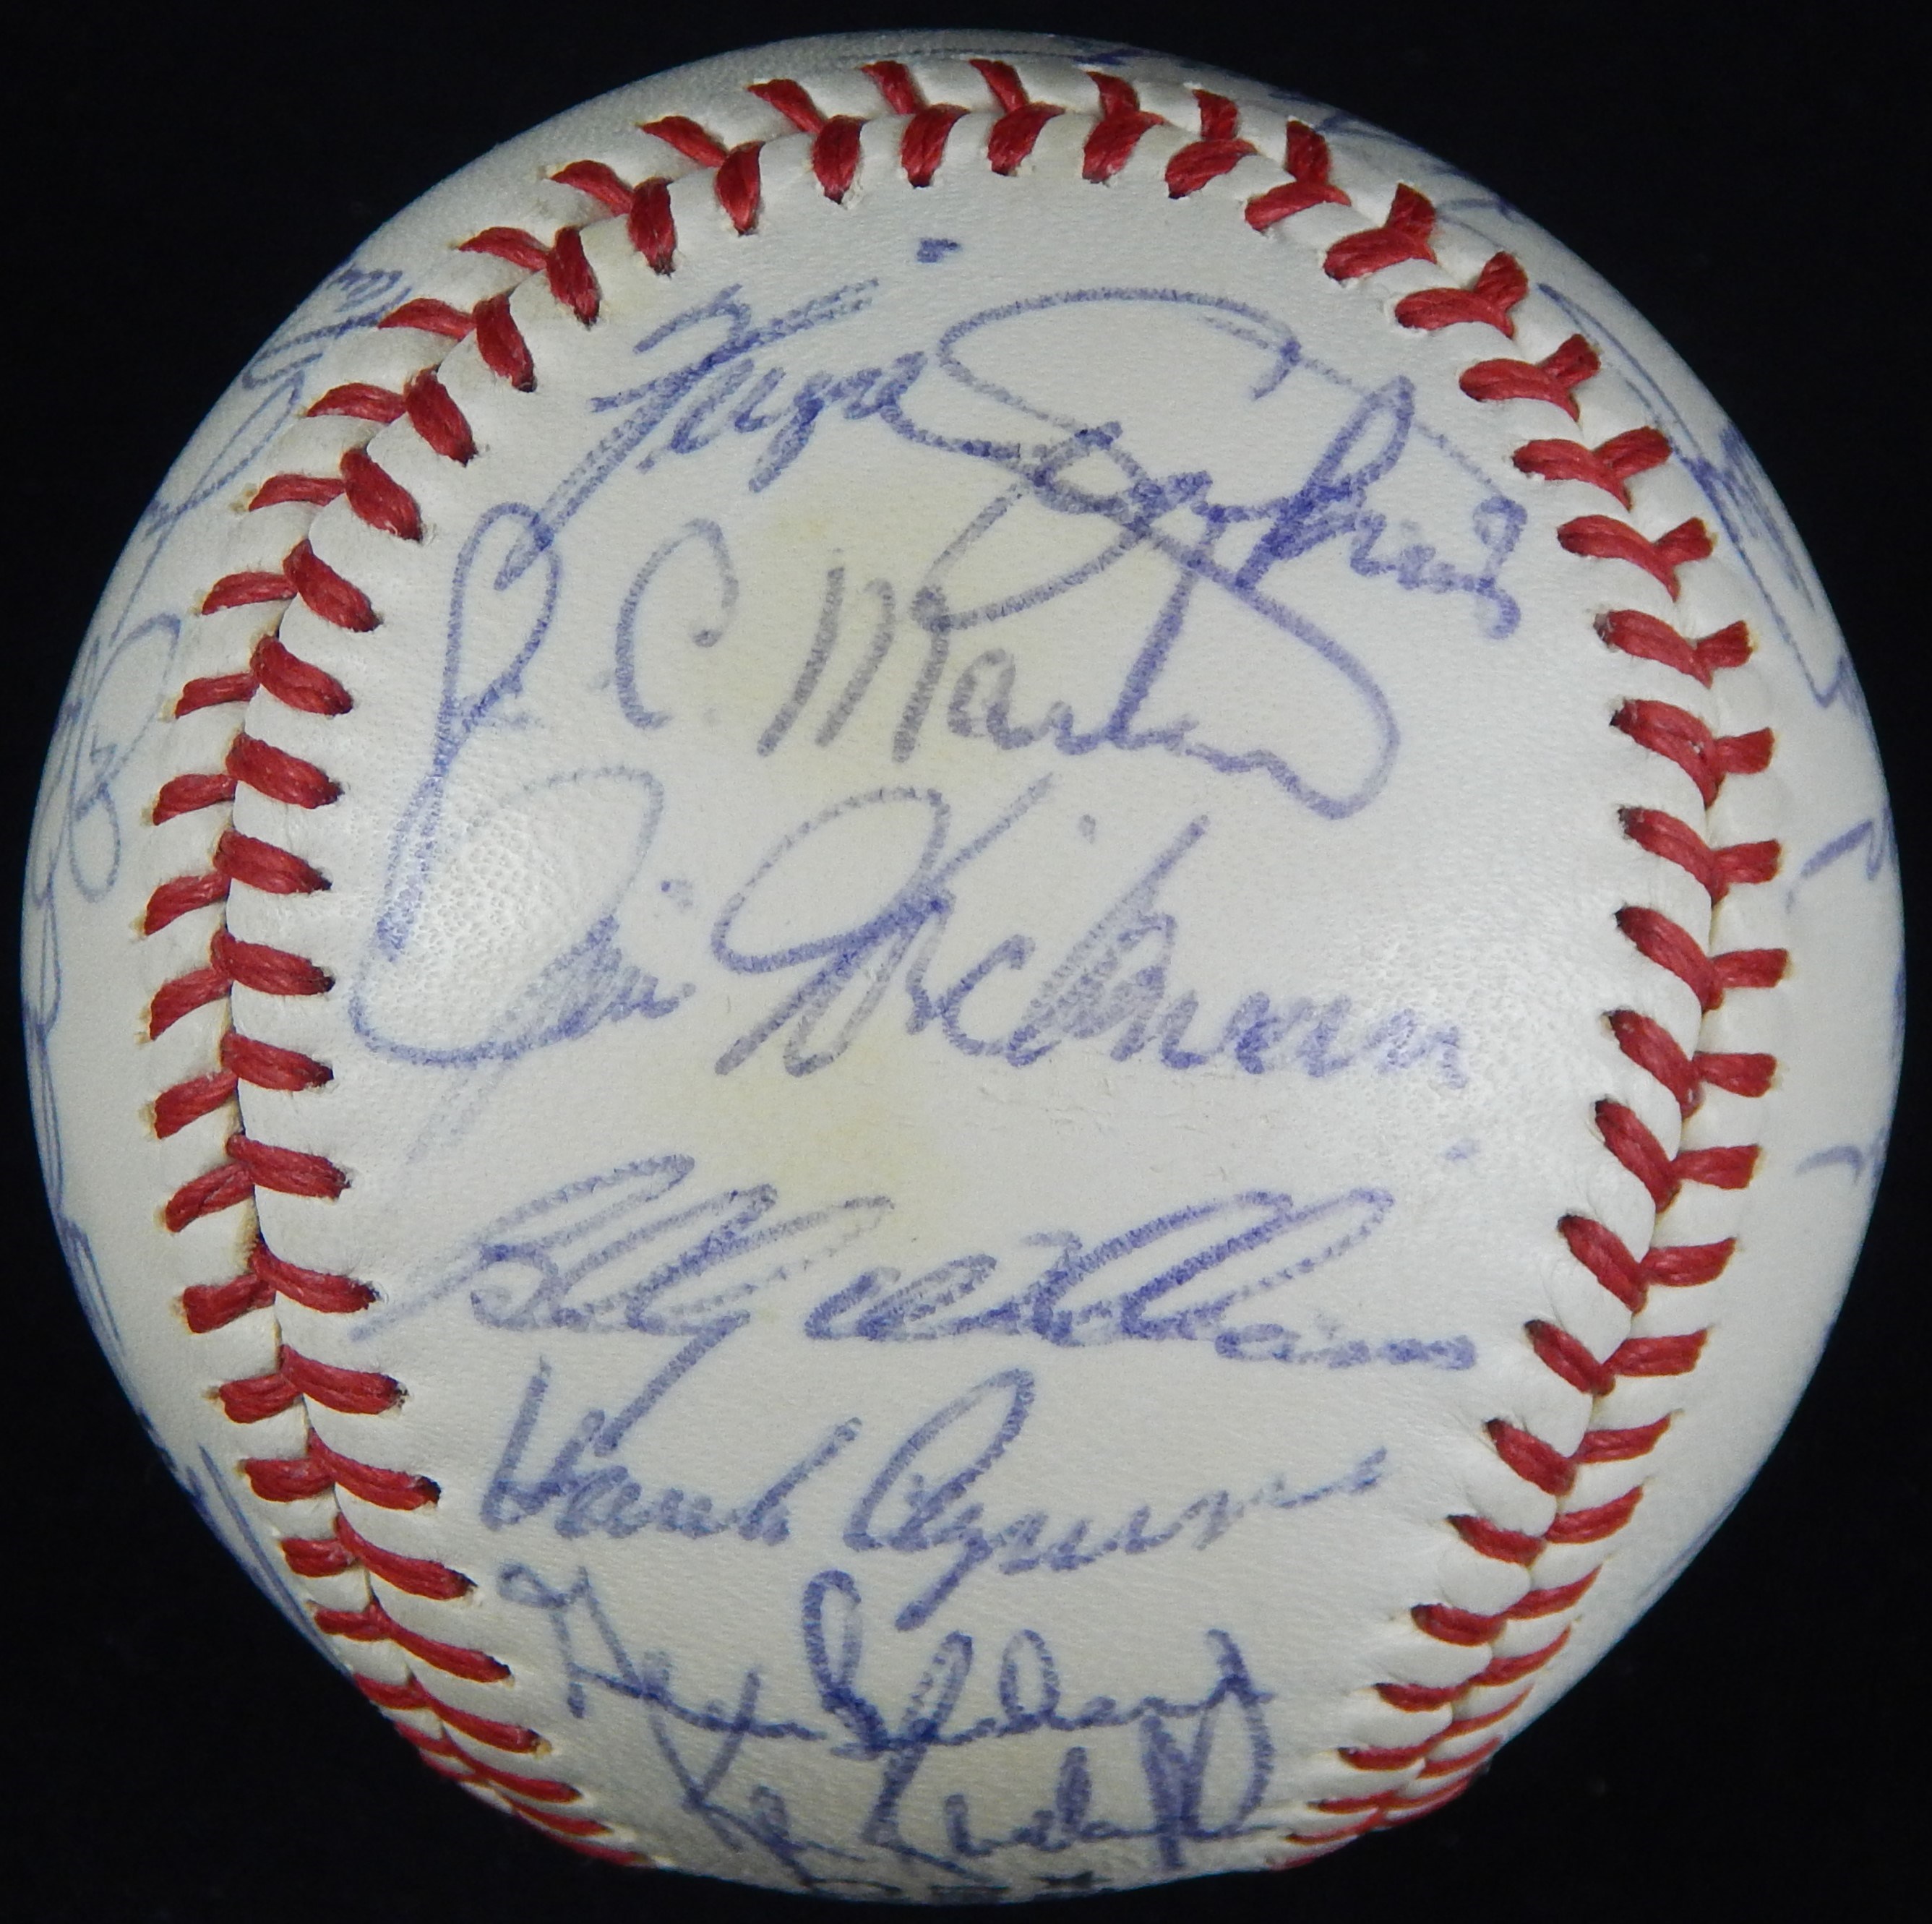 1973 Chicago Cubs Team Signed Baseball with 30 Signatures - JSA LOA